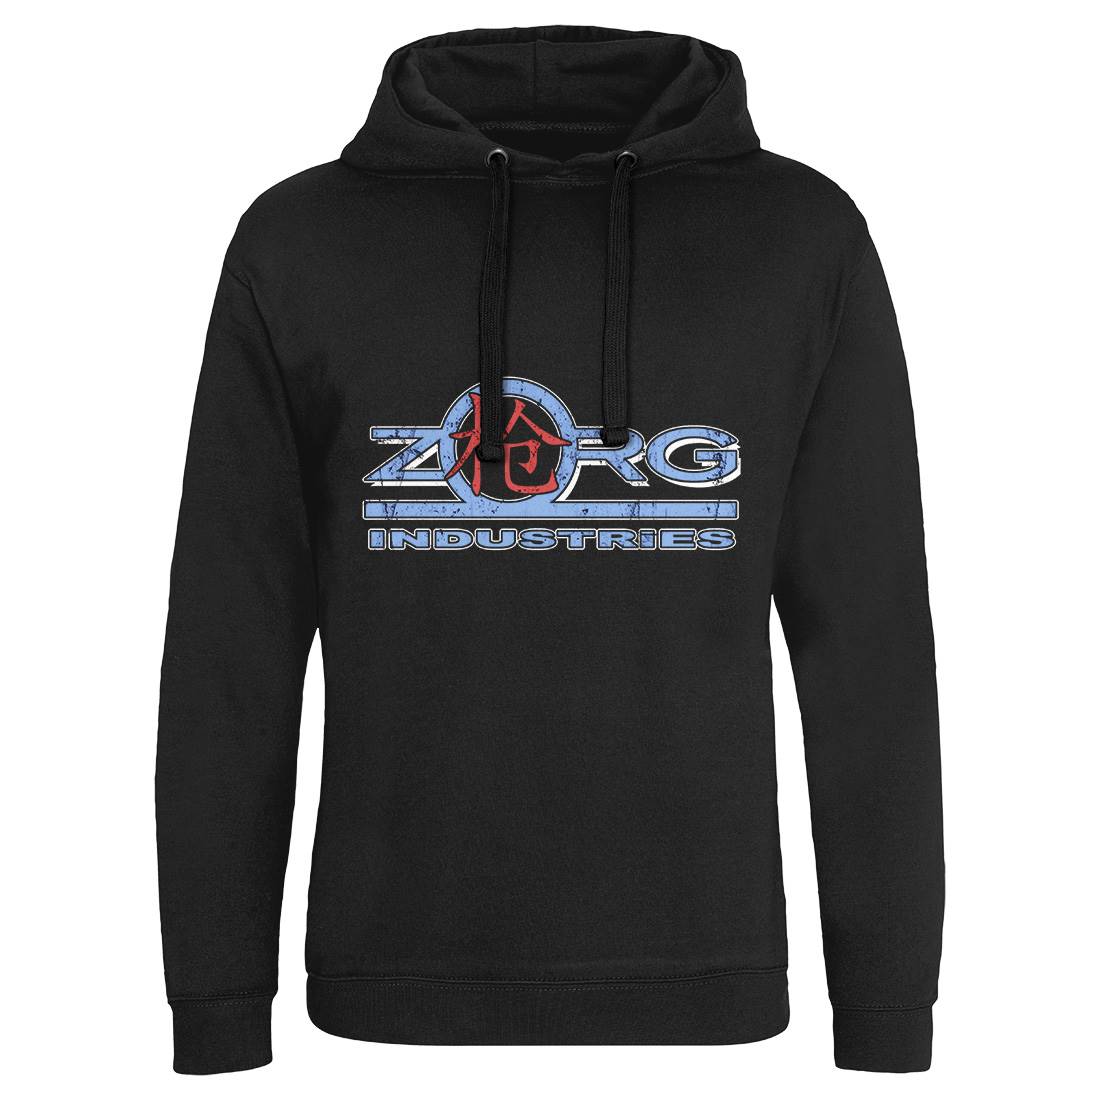 Zorg Ind Mens Hoodie Without Pocket Space D105